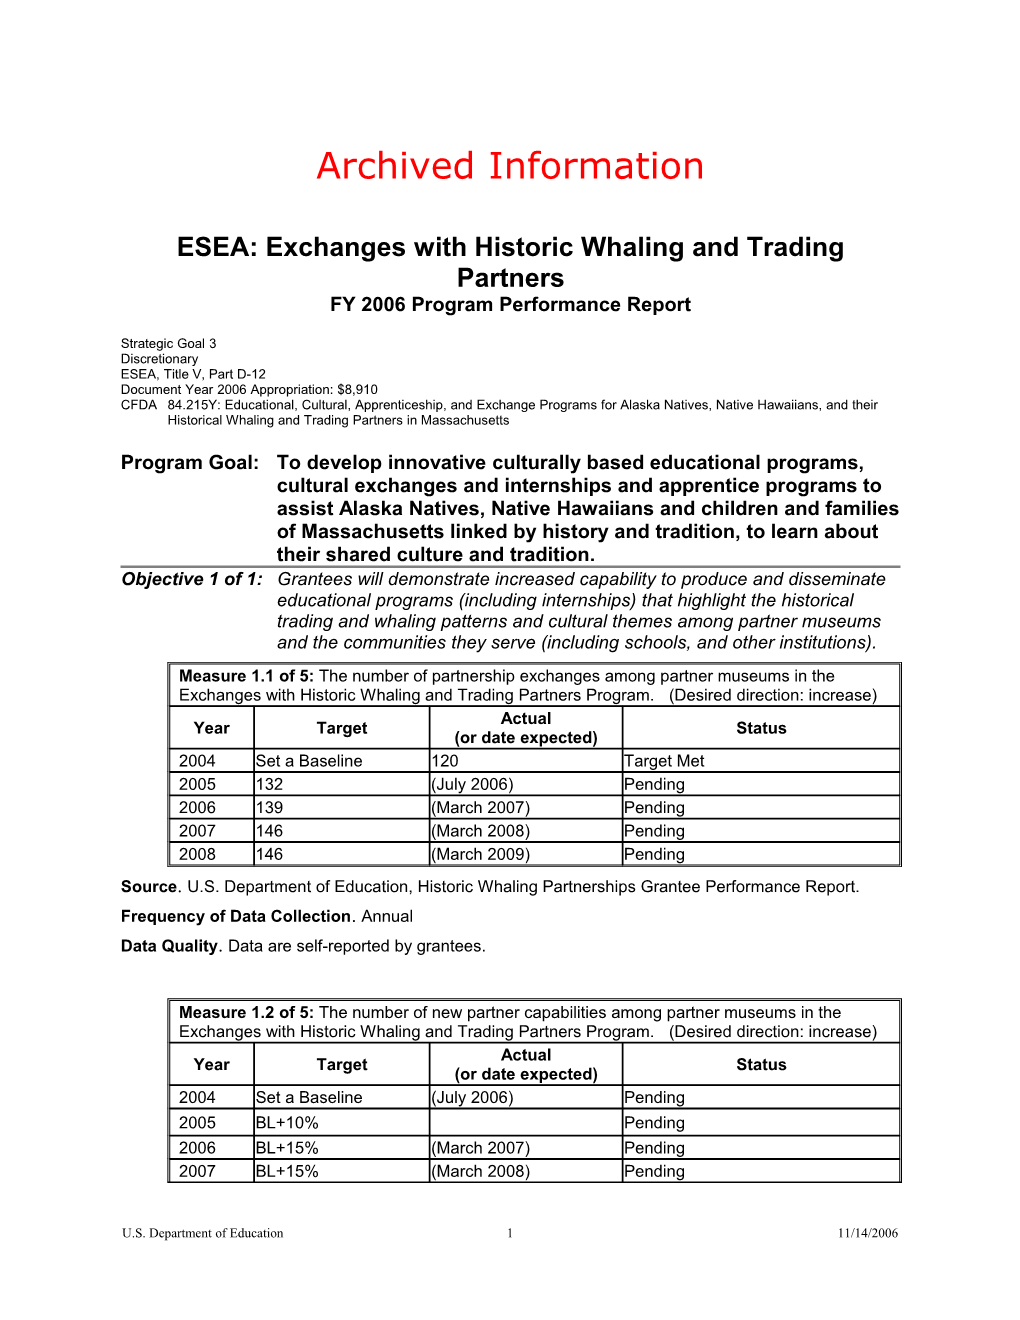 Archived: ESEA: Exchanges with Historic Whaling and Trading Partners (MS Word)